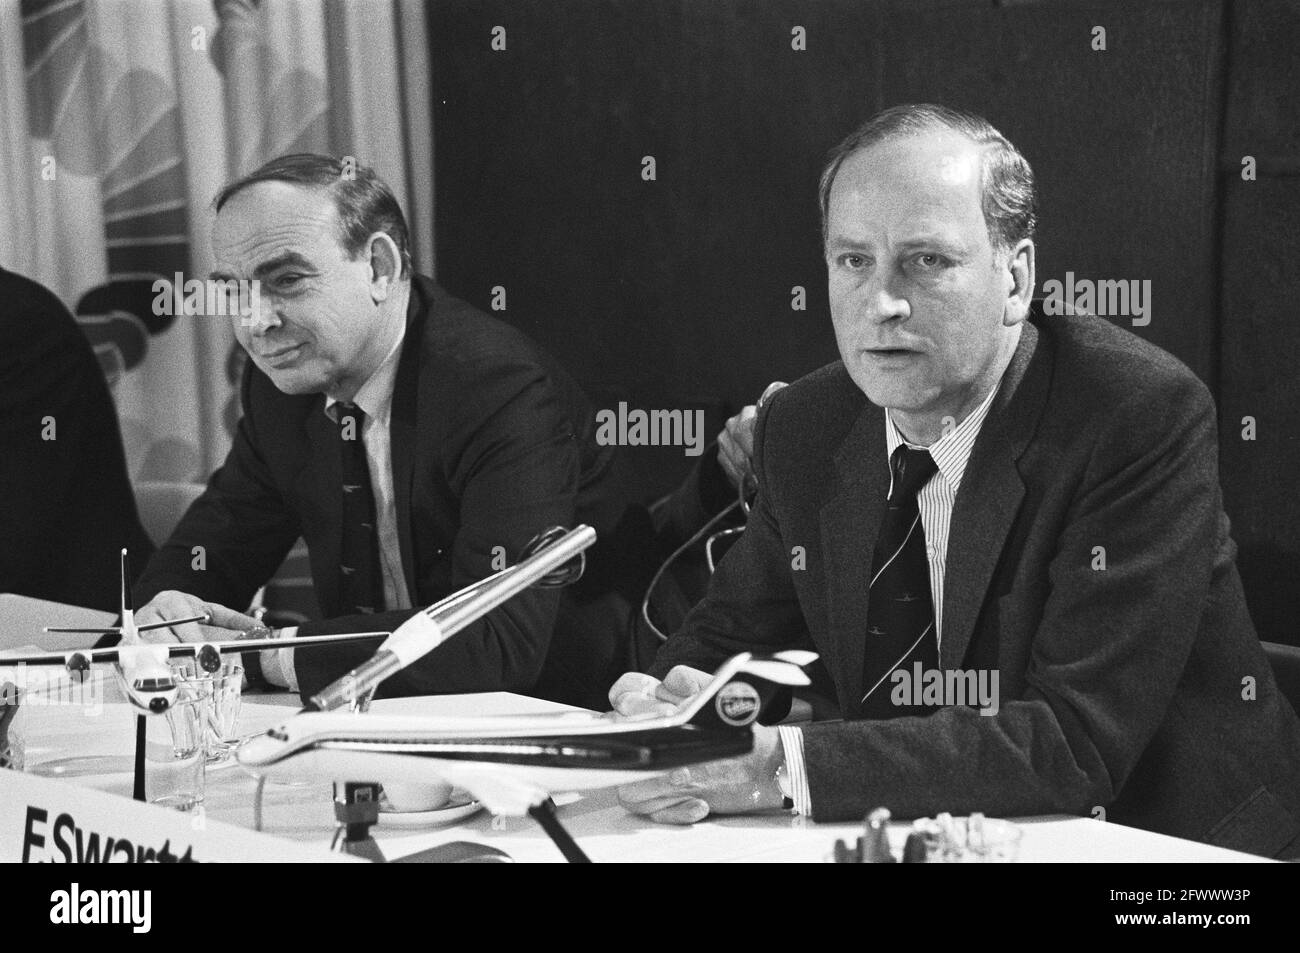 Press conference of aircraft factory Fokker about ending cooperation with Mc Donald Douglas in MDF 100 project. Swarttouw and D. Krook, February 8, 1982, press conference, The Netherlands, 20th century press agency photo, news to remember, documentary, historic photography 1945-1990, visual stories, human history of the Twentieth Century, capturing moments in time Stock Photo